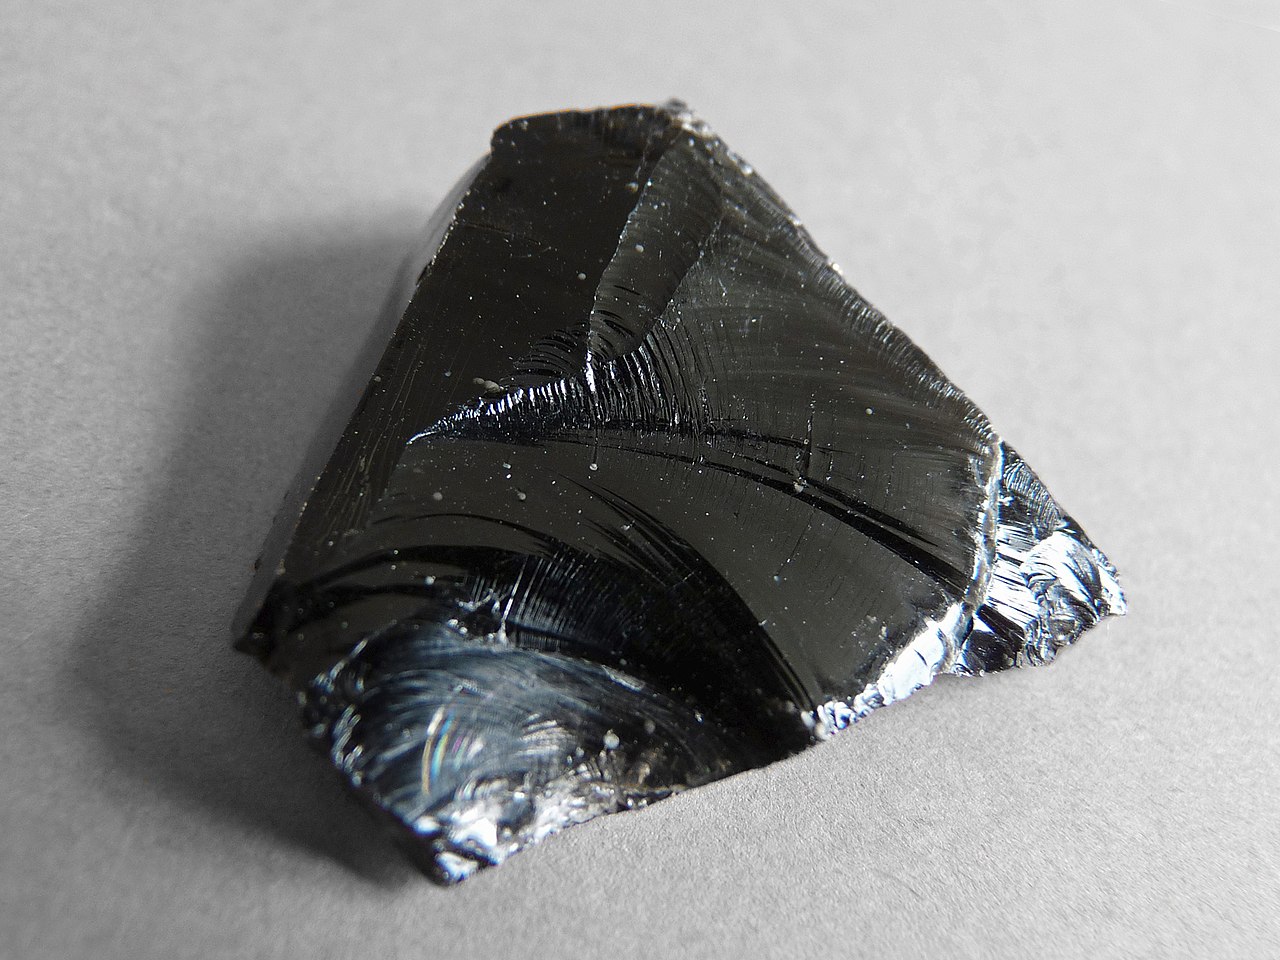 Author: By Ji-ElleIt - Own work, CC BY-SA 3.0 (picture shows obsidian, not necessarily the one from Vinča)